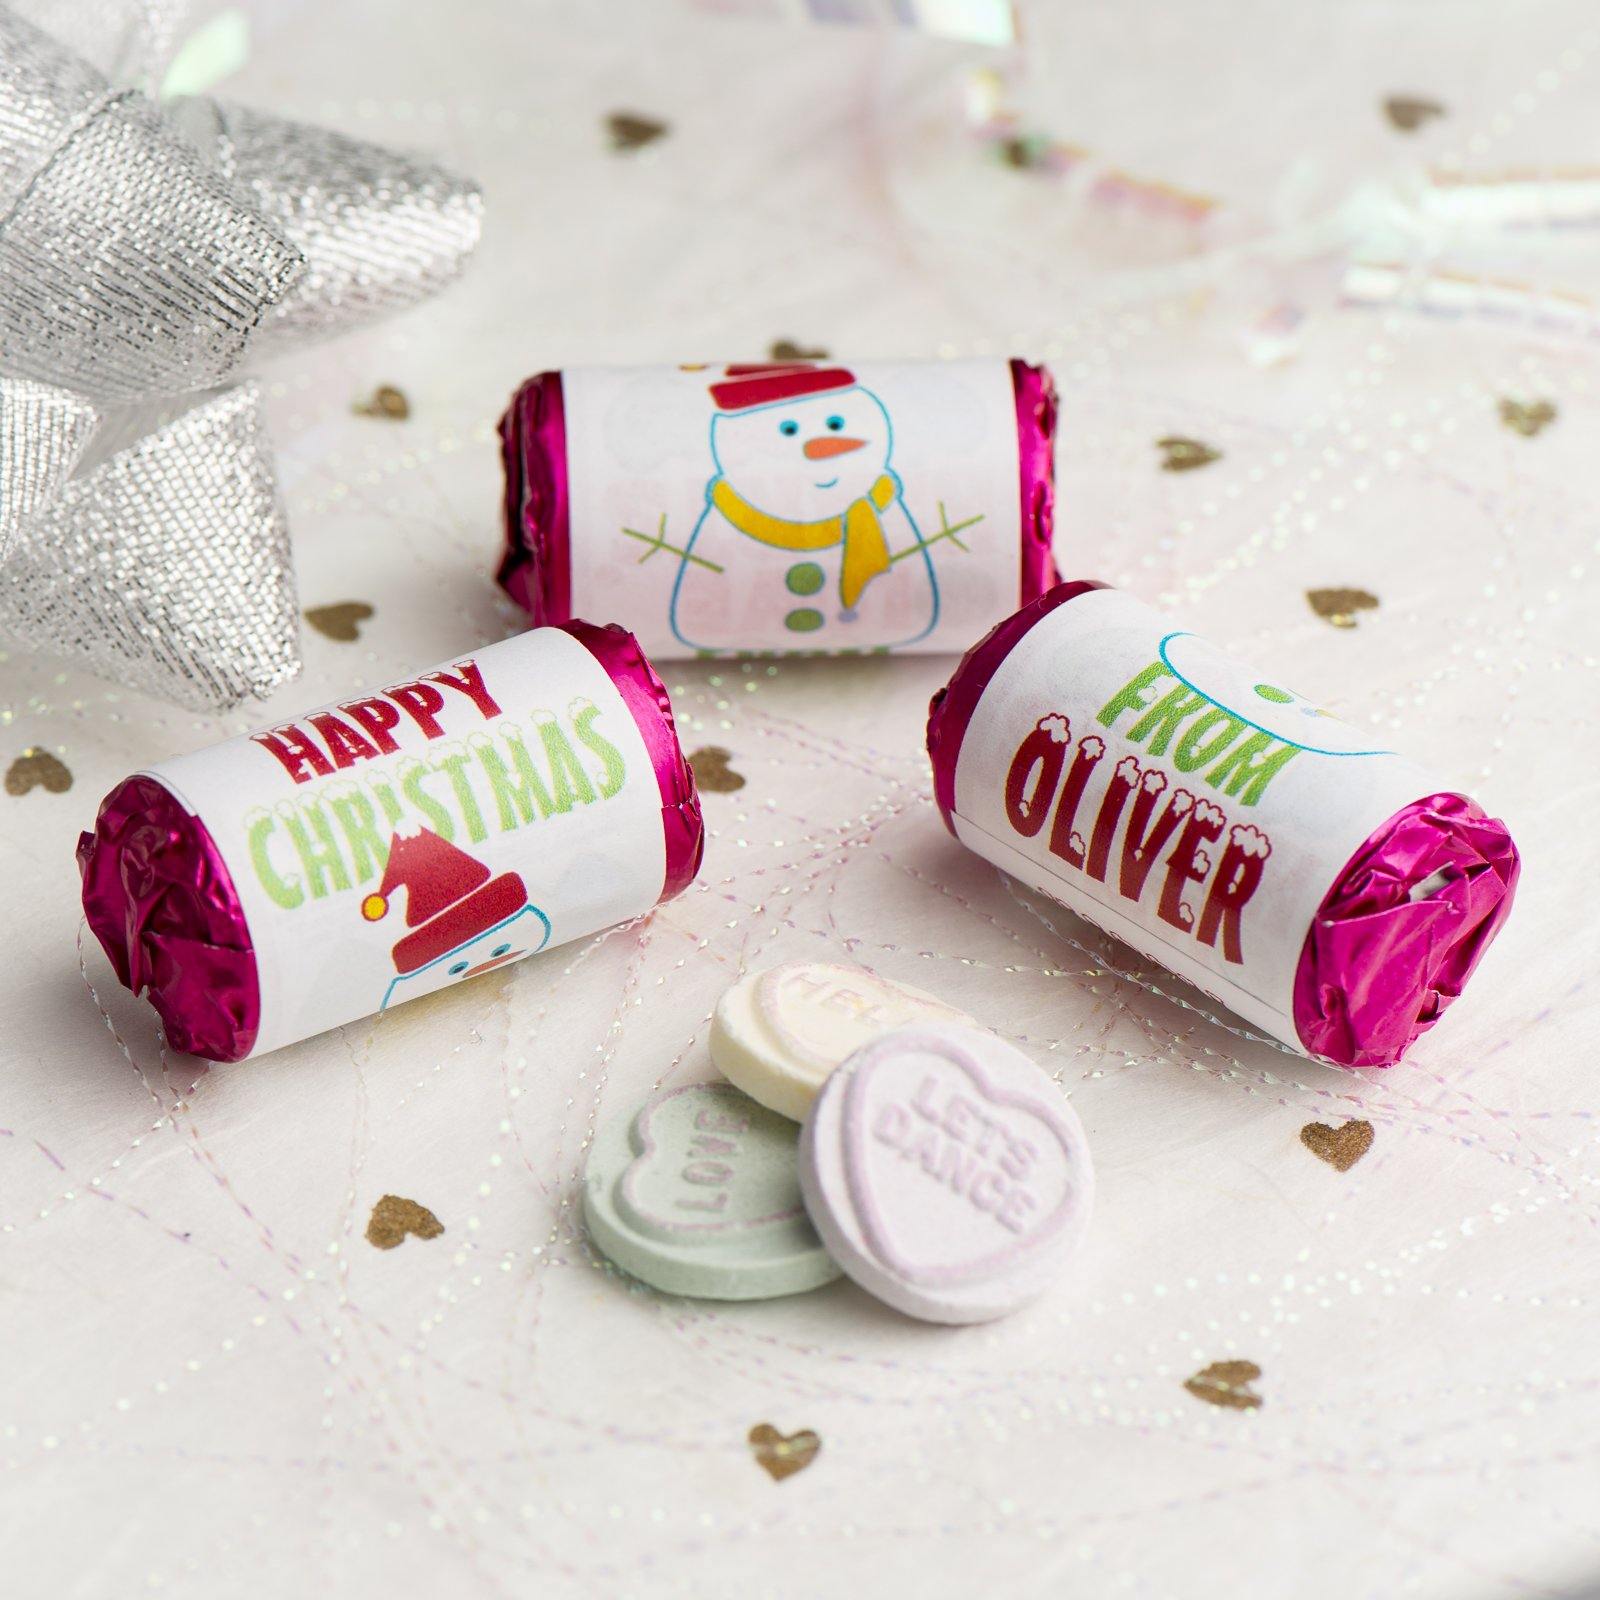 Love Hearts - Personalised Mini Love Hearts Rolls Sweets Favour - Christmas-Snowmen